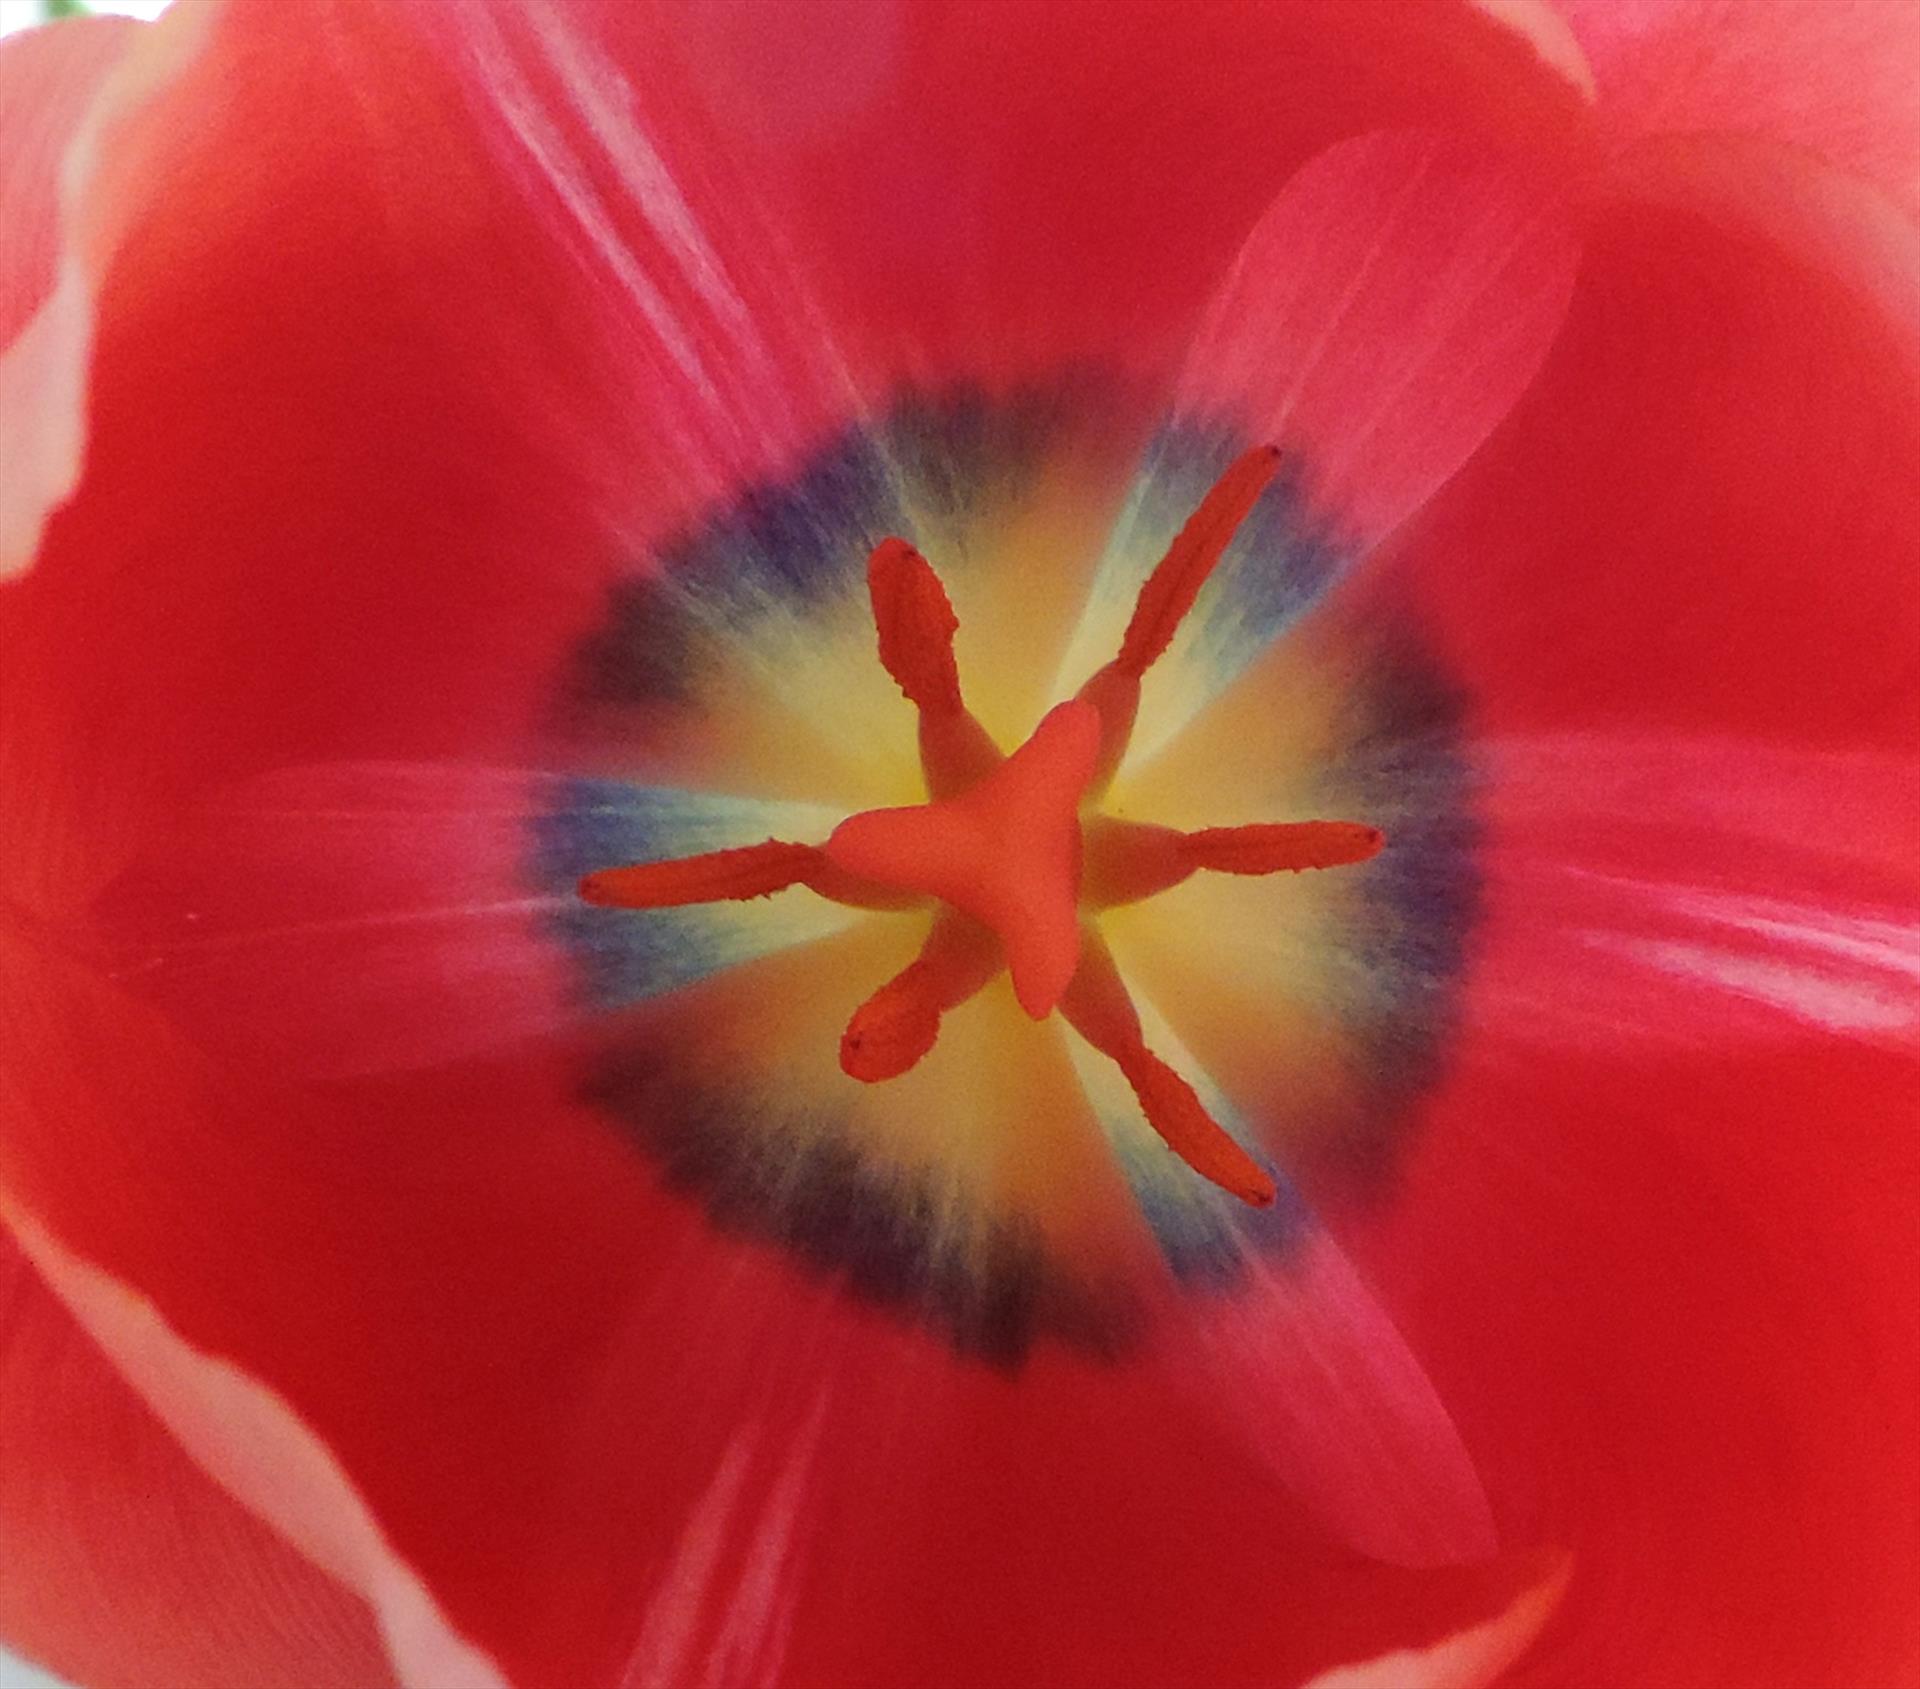 Peggy Stokes, The Vortex of a Tulip. Photography, 30x30.